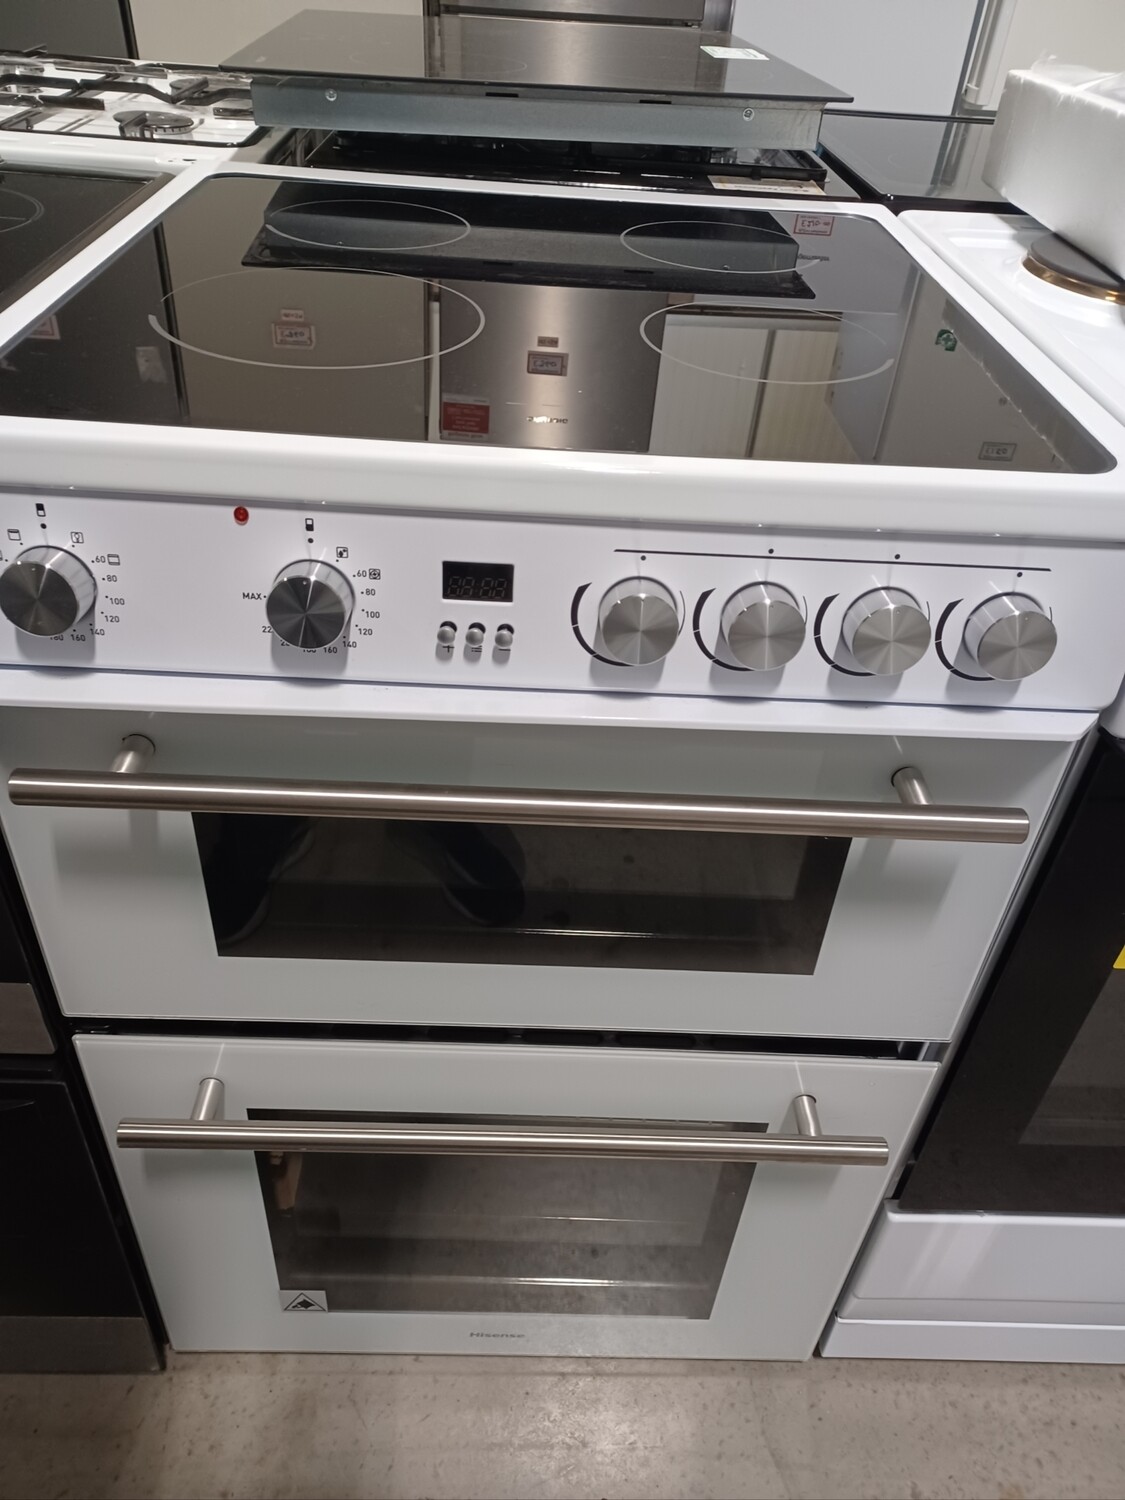 Hisense HDE3211BWUK 60cm Electric Cooker with Ceramic Hob - White - New Graded 12 Month Guarantee 